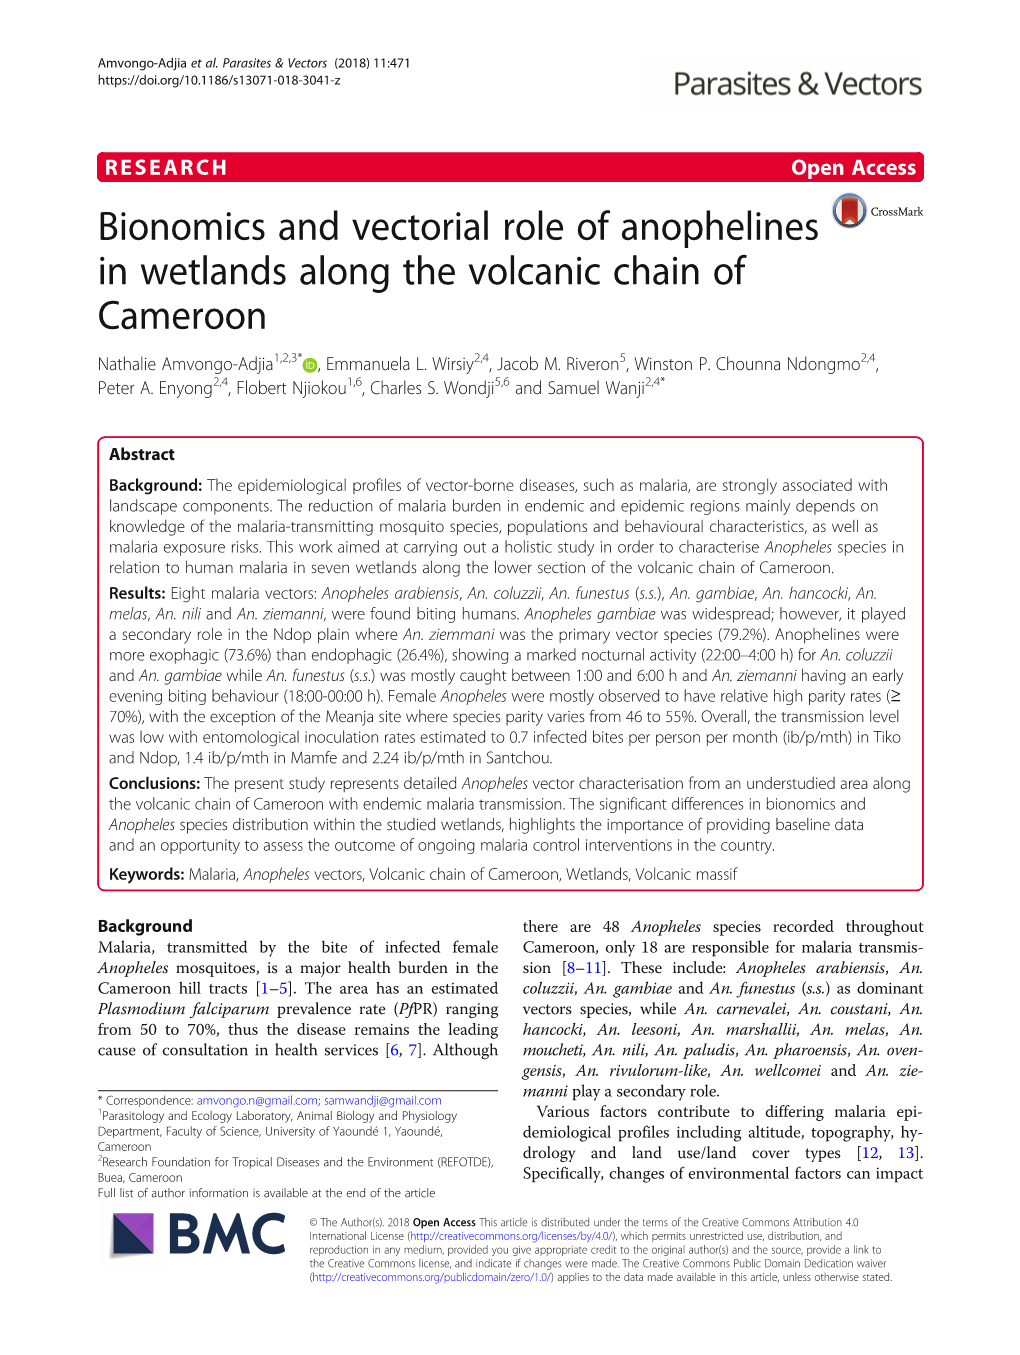 Bionomics and Vectorial Role of Anophelines in Wetlands Along the Volcanic Chain of Cameroon Nathalie Amvongo-Adjia1,2,3* , Emmanuela L